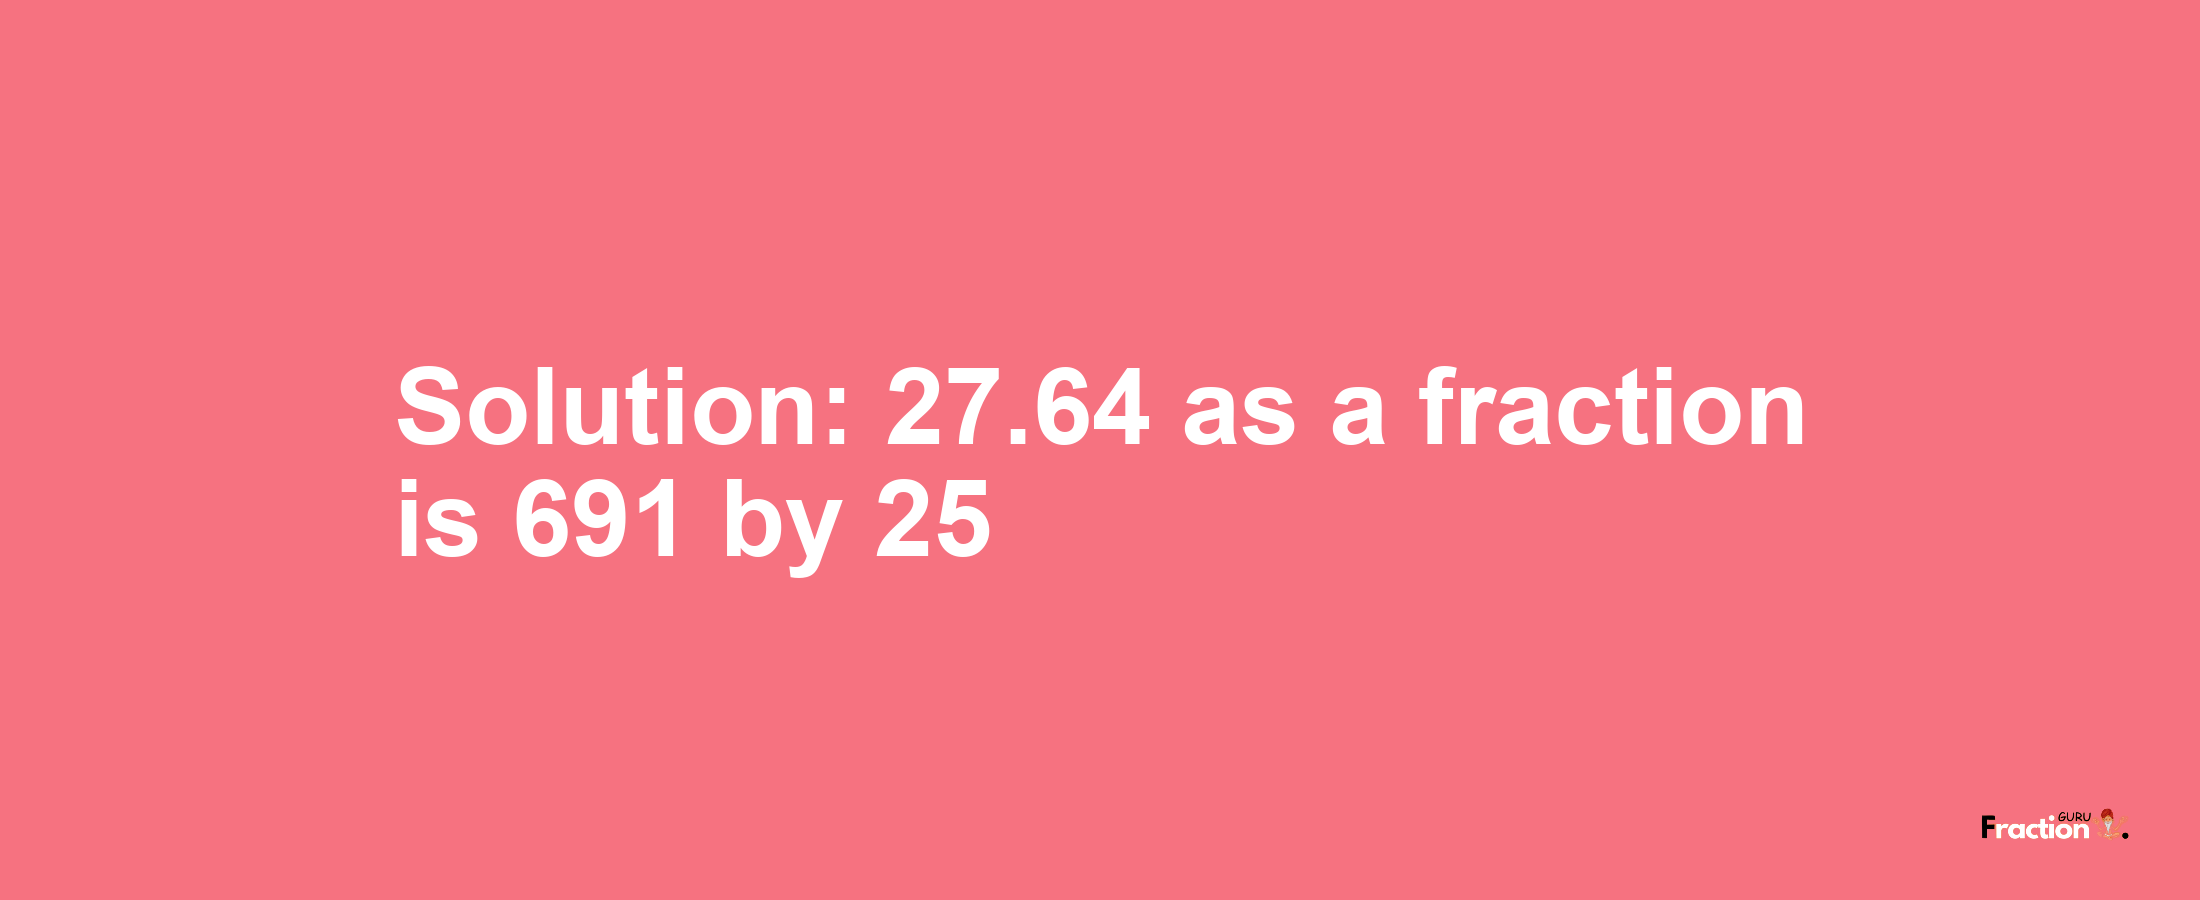 Solution:27.64 as a fraction is 691/25